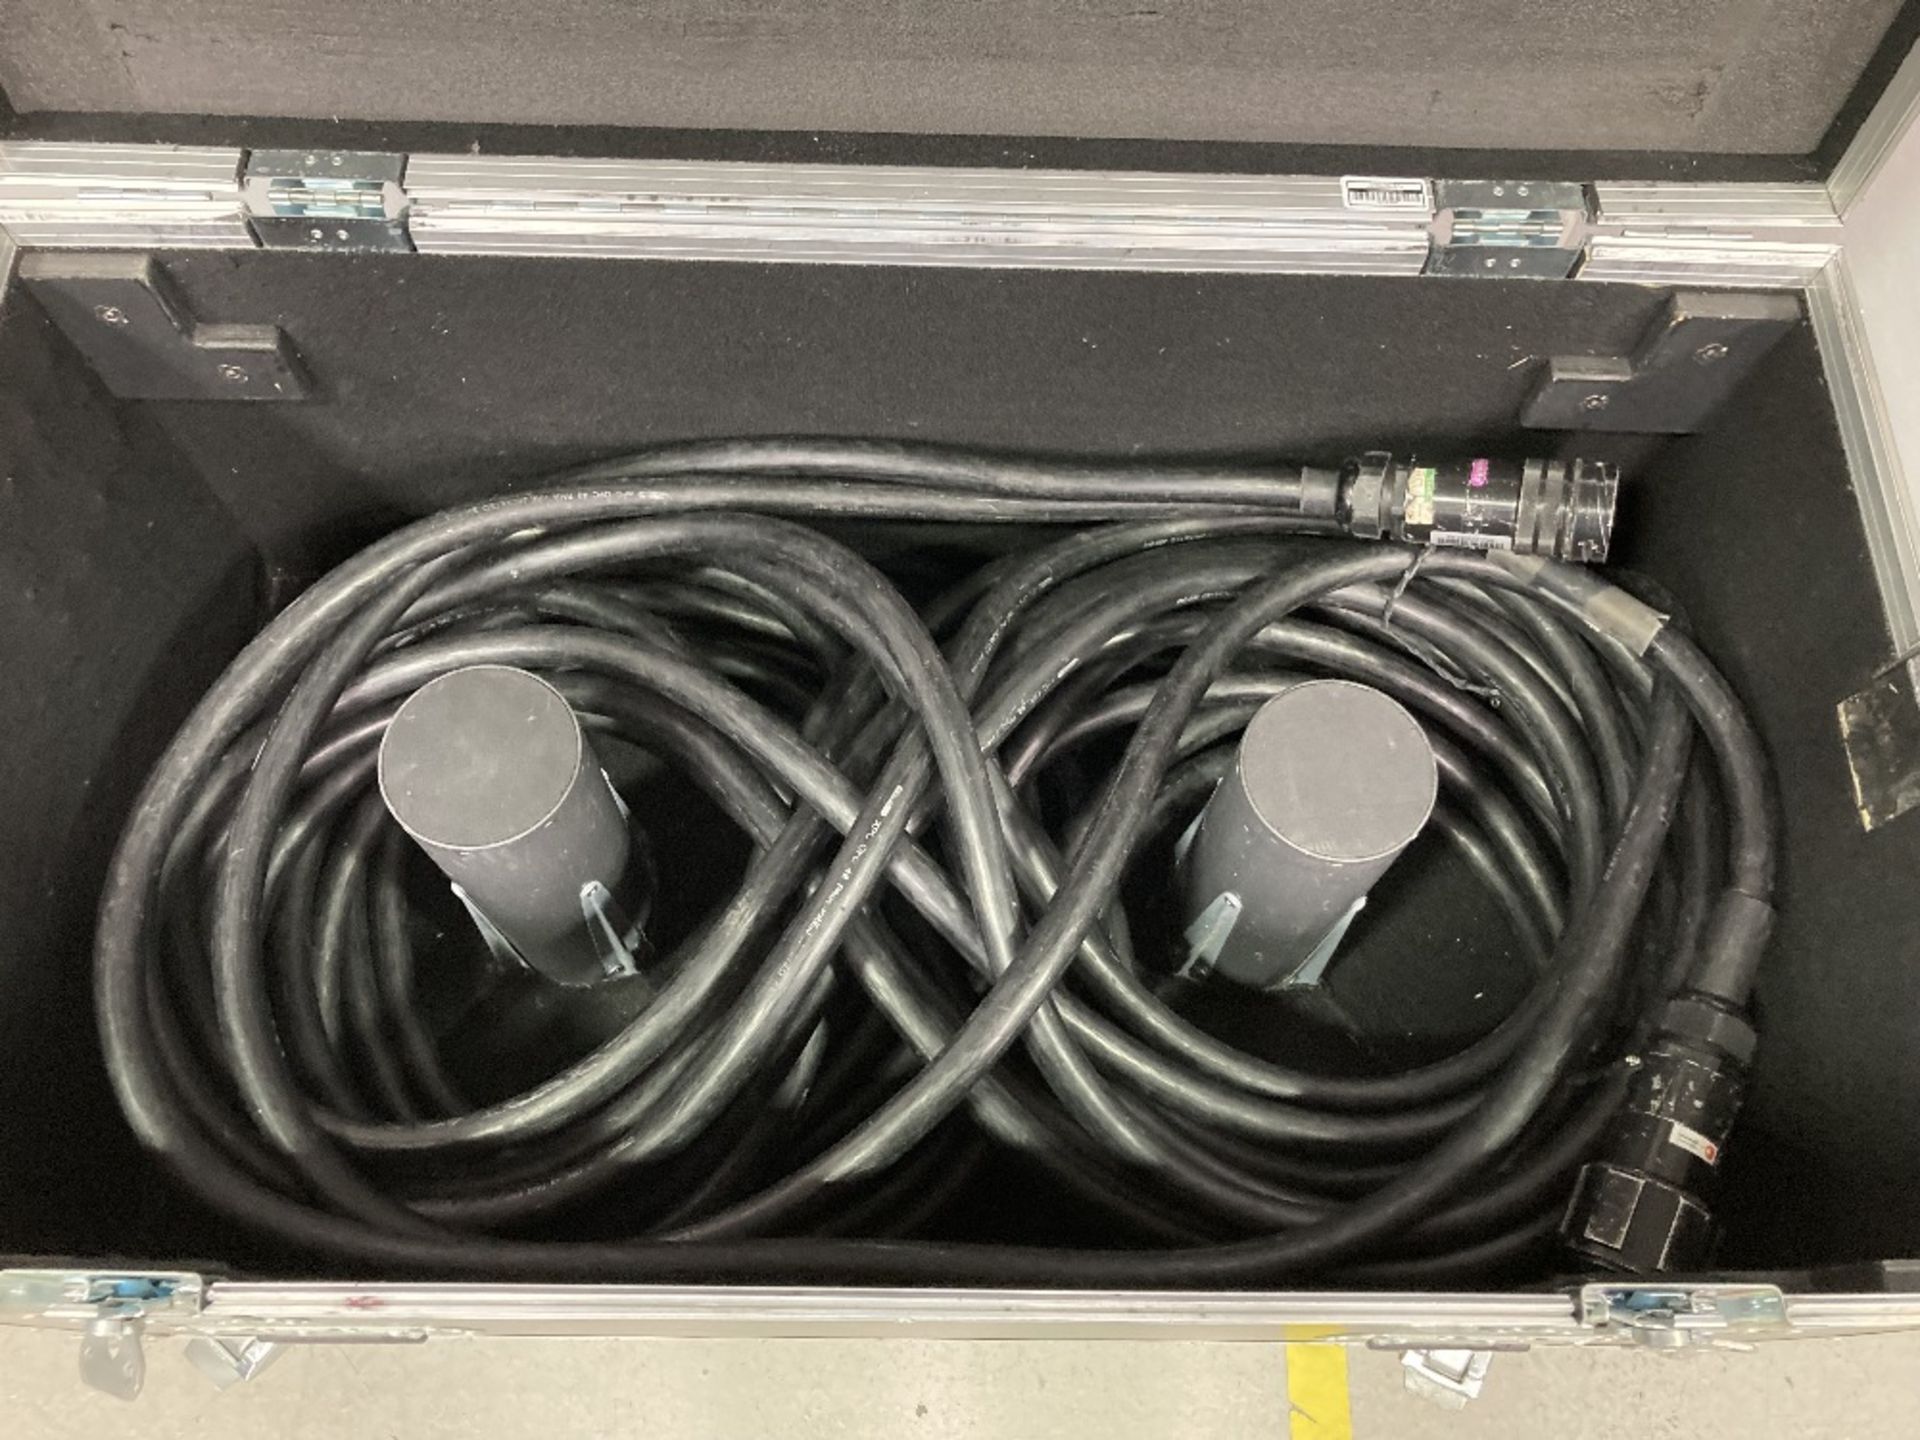 32/8 Multicore Cable, Stagebox, Tail & Heavy Duty Mobile Flight Case - Image 4 of 6